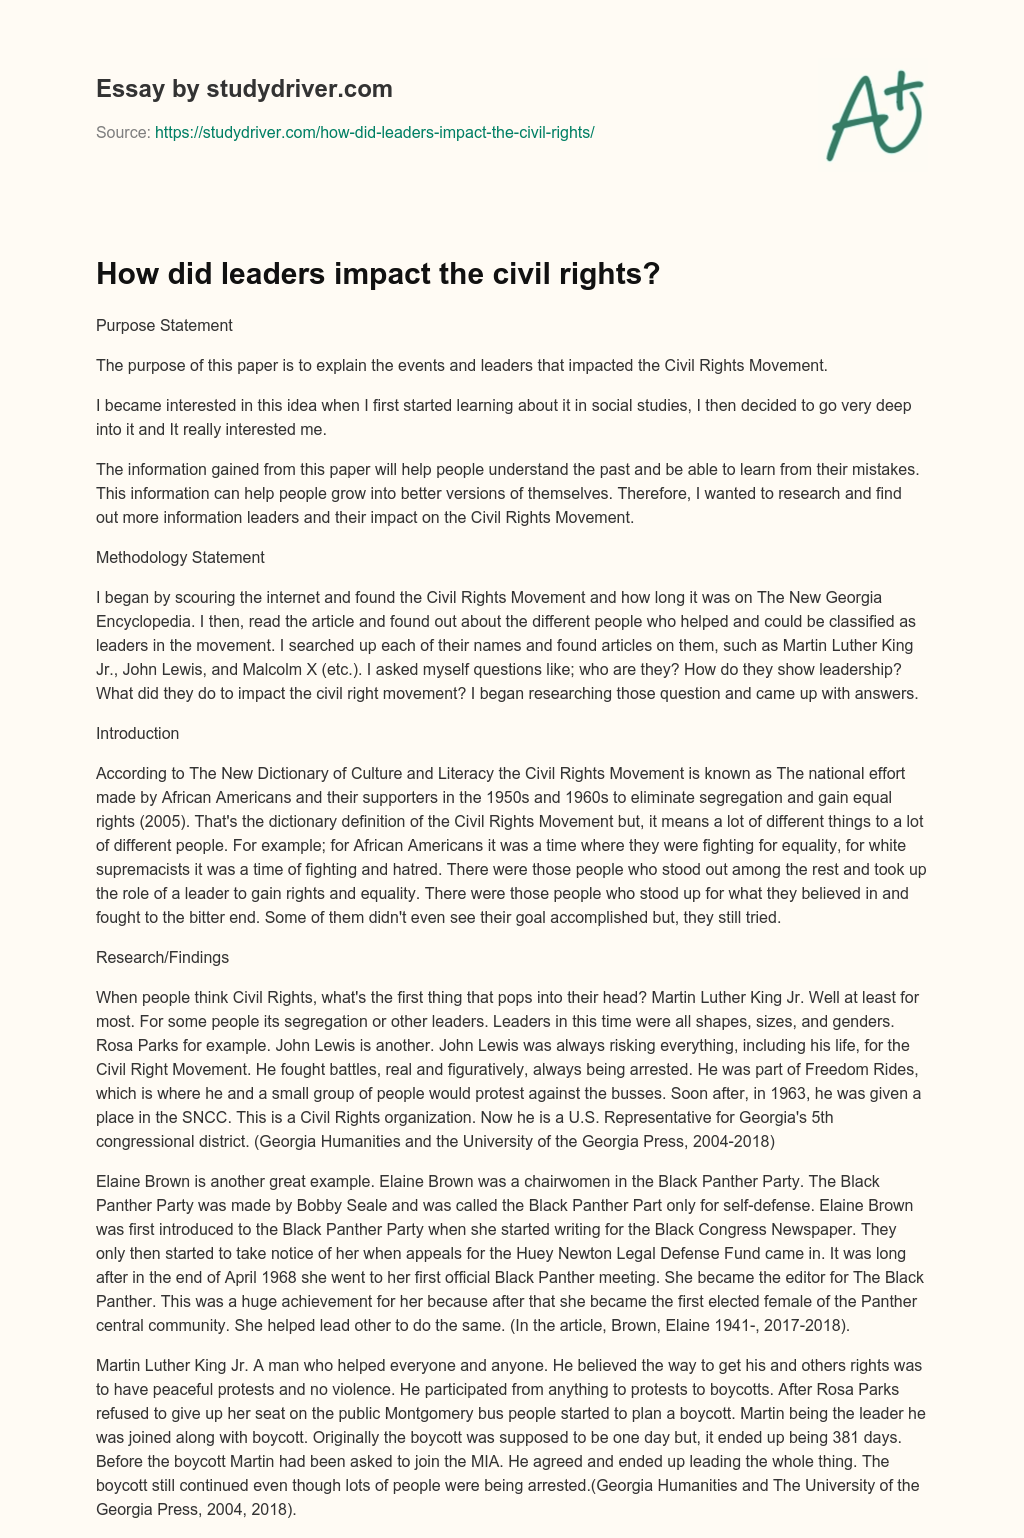 How did Leaders Impact the Civil Rights? essay